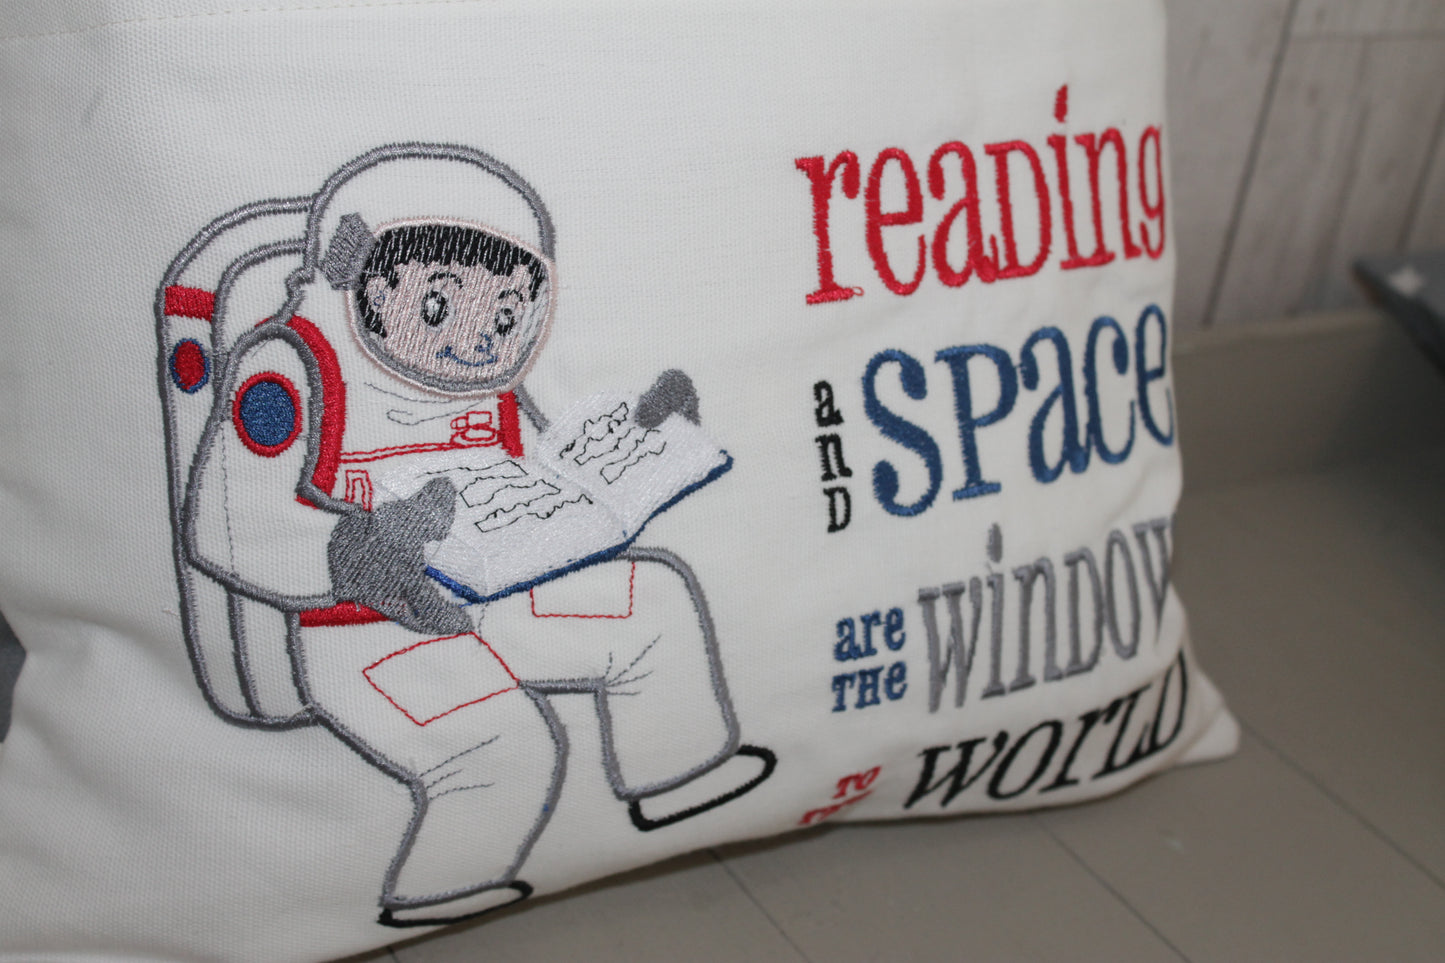 Space man Reading in space Children's Reading Book Cushion - Lizzie Dixon Designs